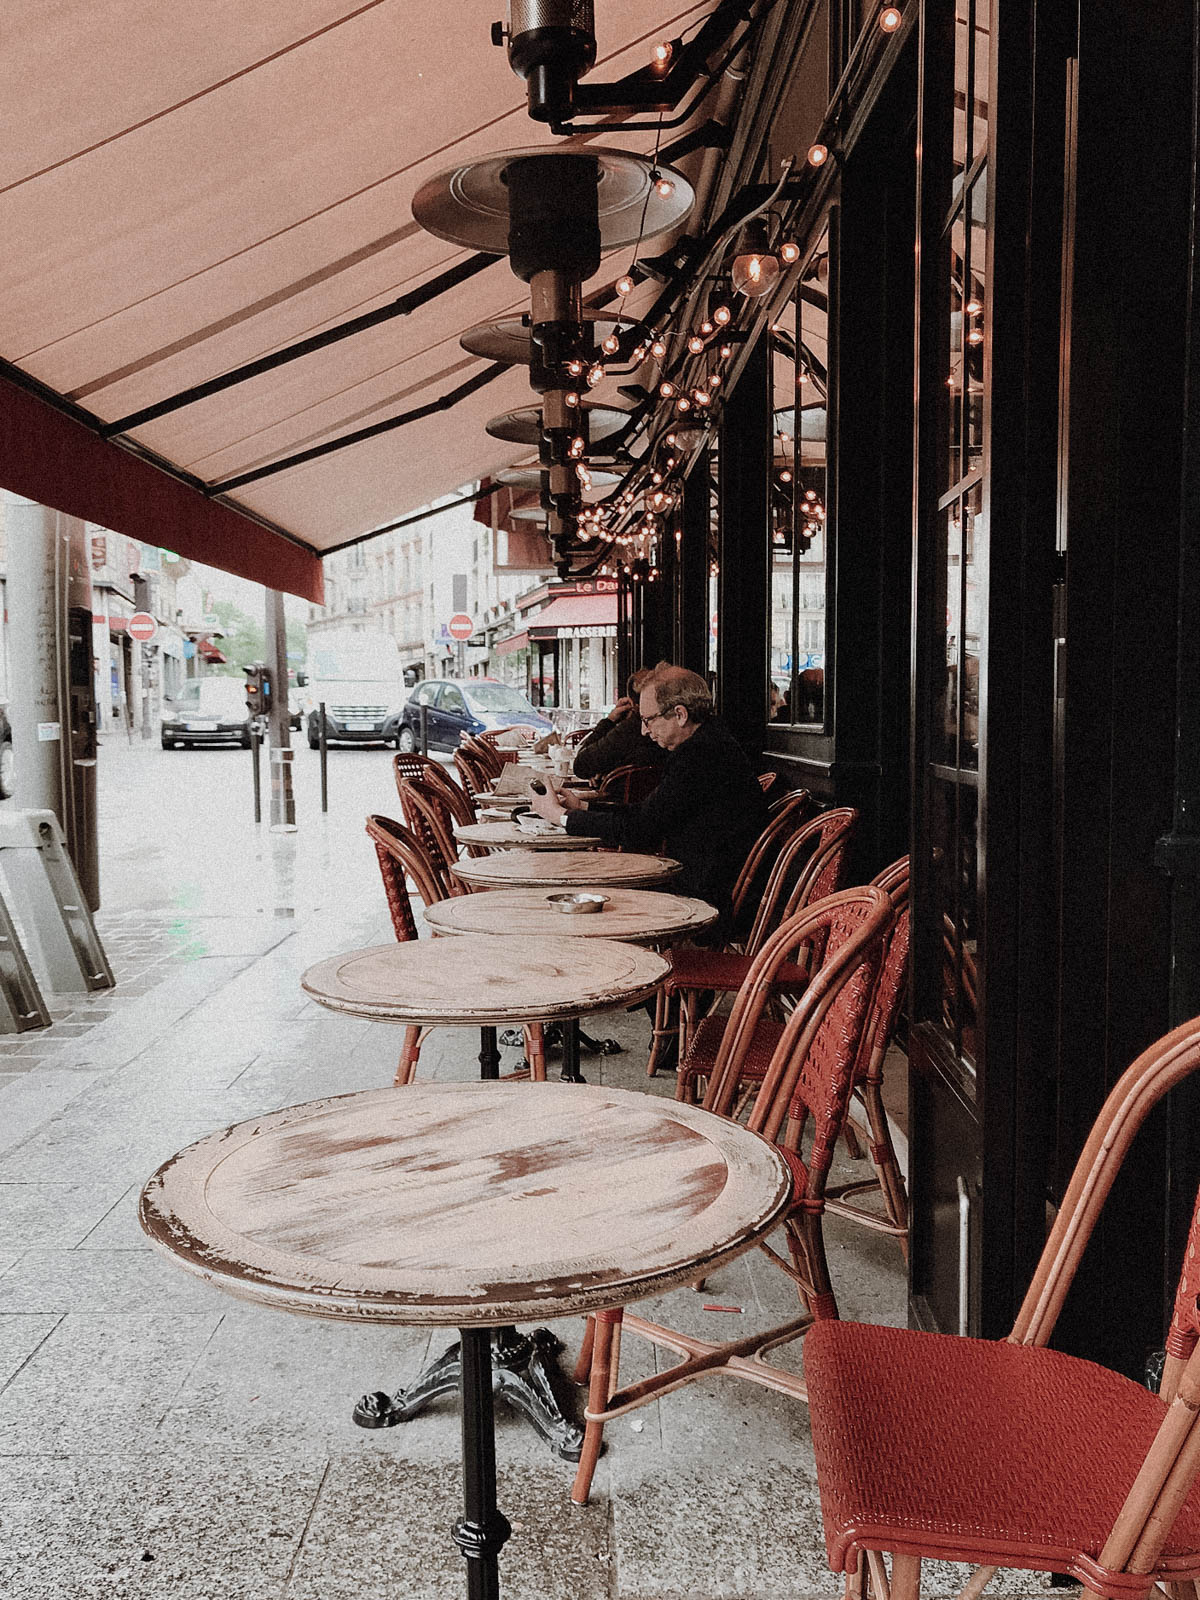 Paris France Travel Guide - Classic French Cafe / RG Daily Blog